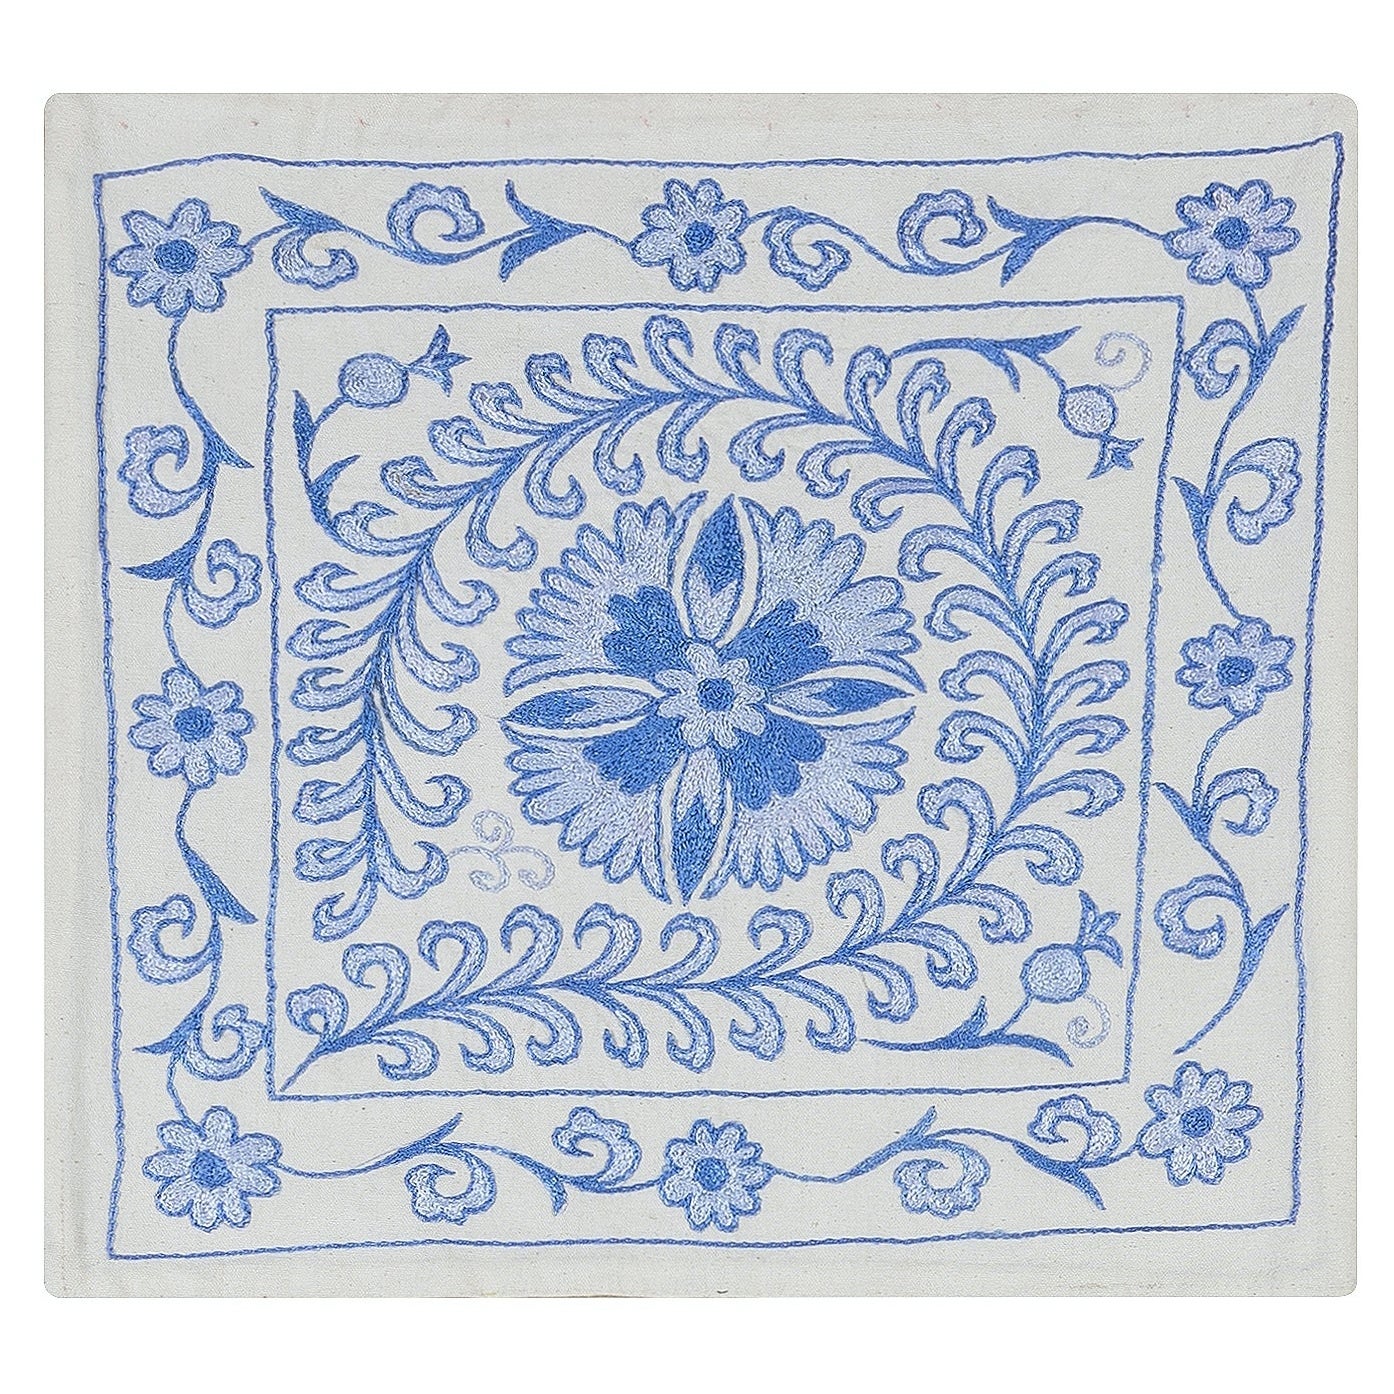 New Silk Hand Embroidery Suzani Floral Cushion Cover in Cream & Blue For Sale